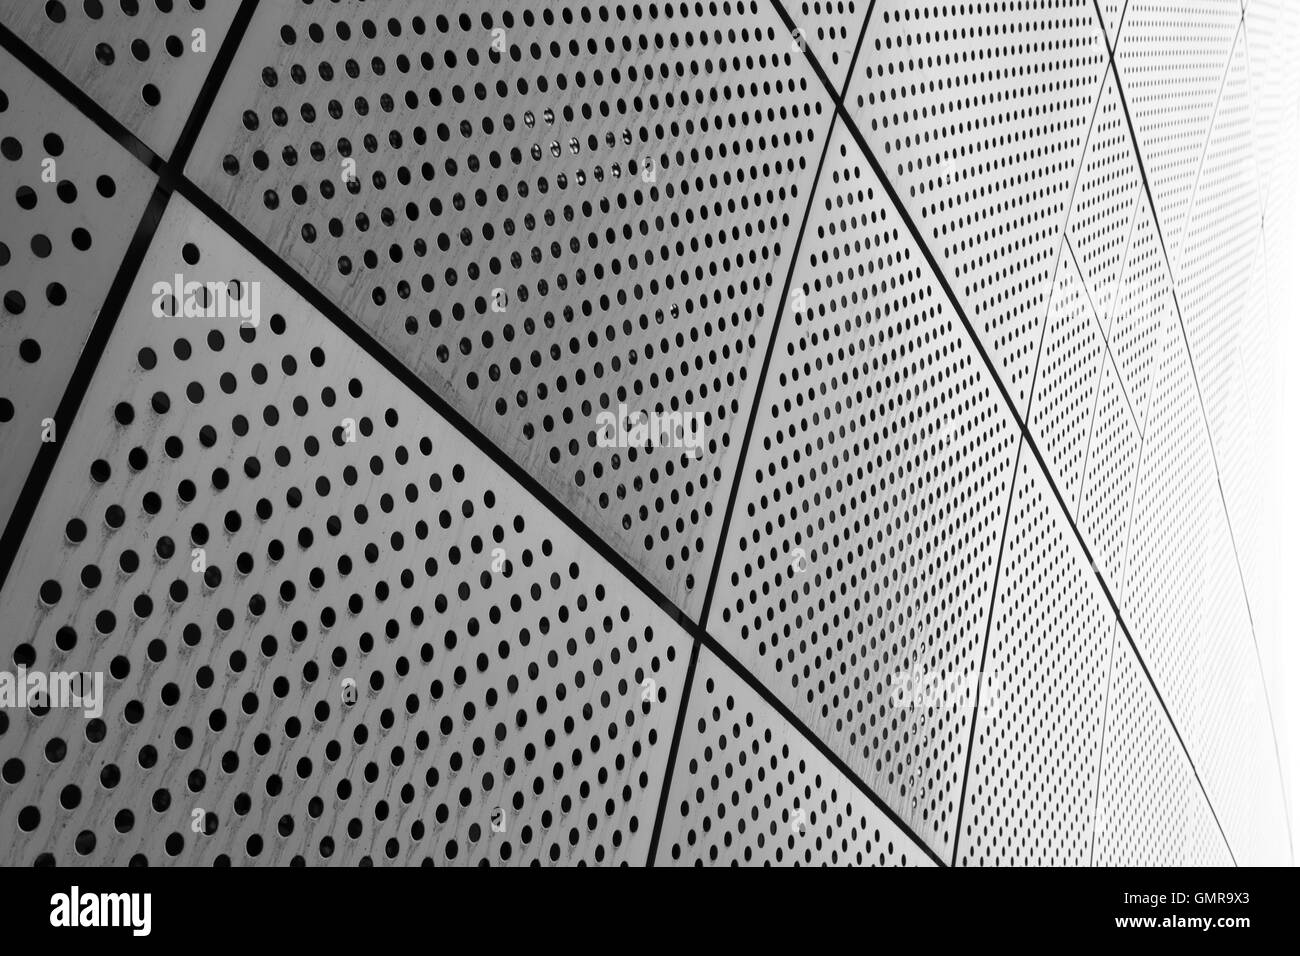 SEOUL, SOUTH KOREA - AUGUST 14, 2016: Part of a wall at Dongdaemun Design Plaza roof in Seoul, designed by Zaha Hadid. Photo tak Stock Photo